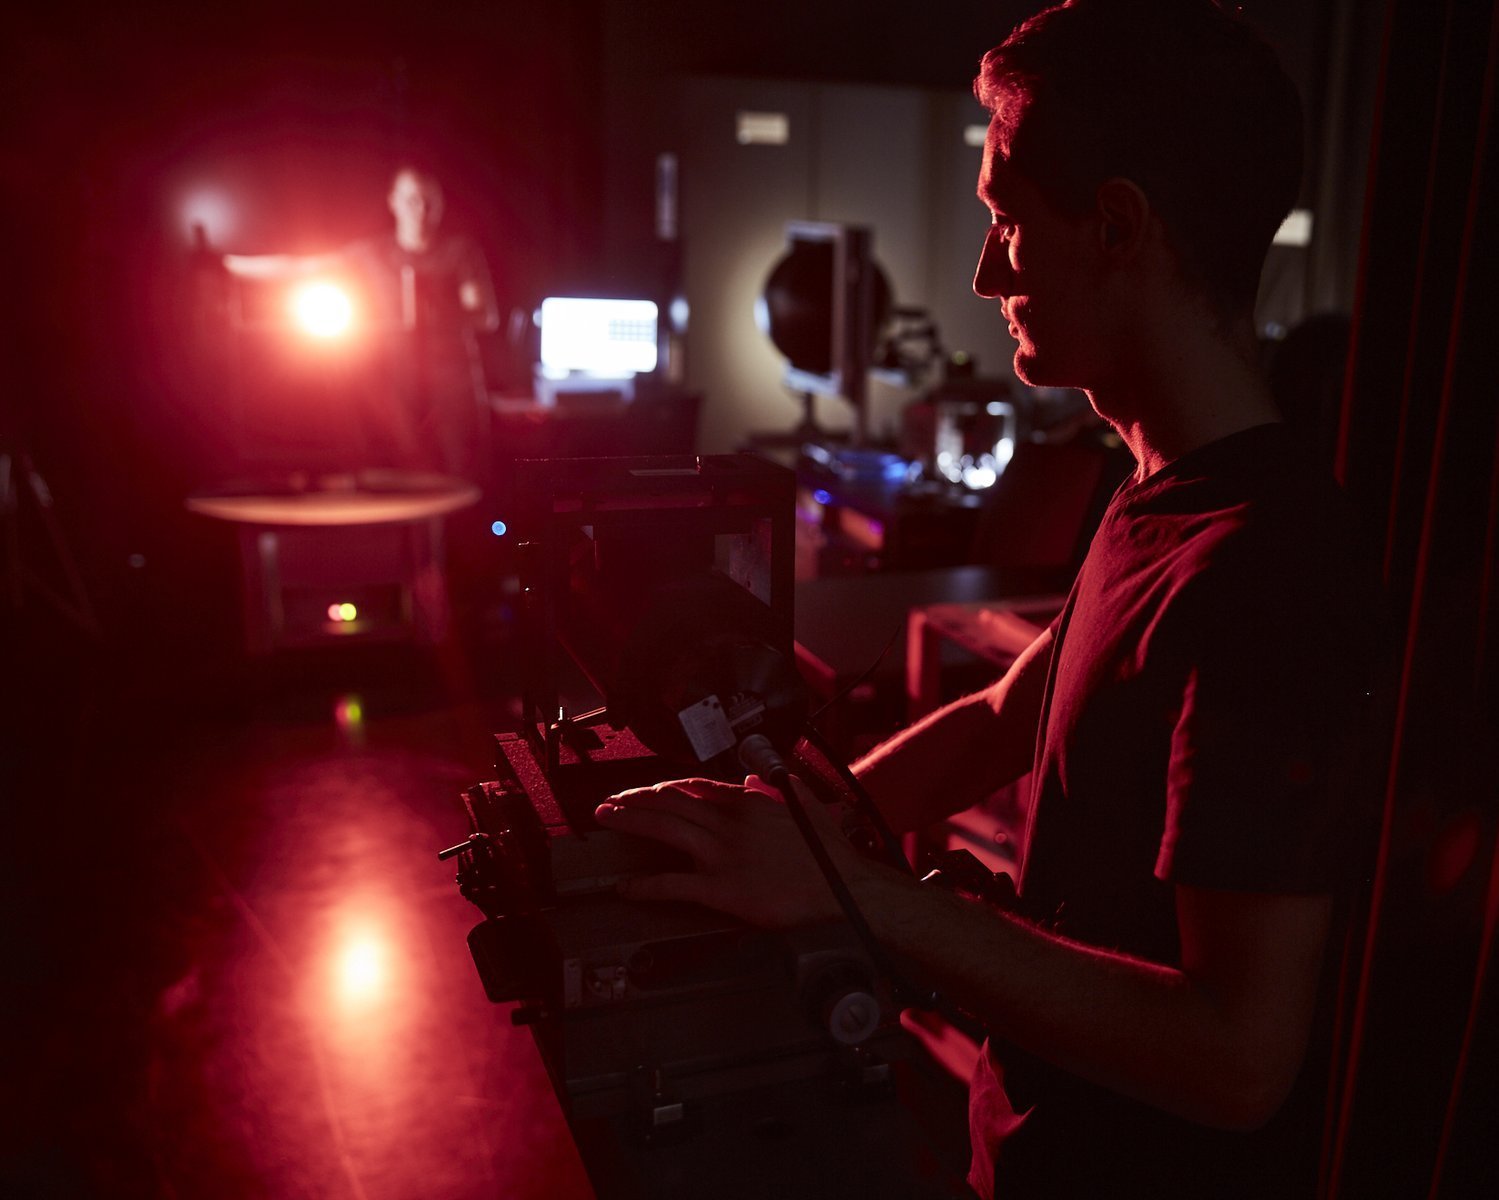 We look into a darkened laboratory. In the background you can dimly make out a student aiming a lamp. The light source shines directly into the camera and the scattered light illuminates the room in a faint red. In the foreground is a second student pointing a detector at the light source. 